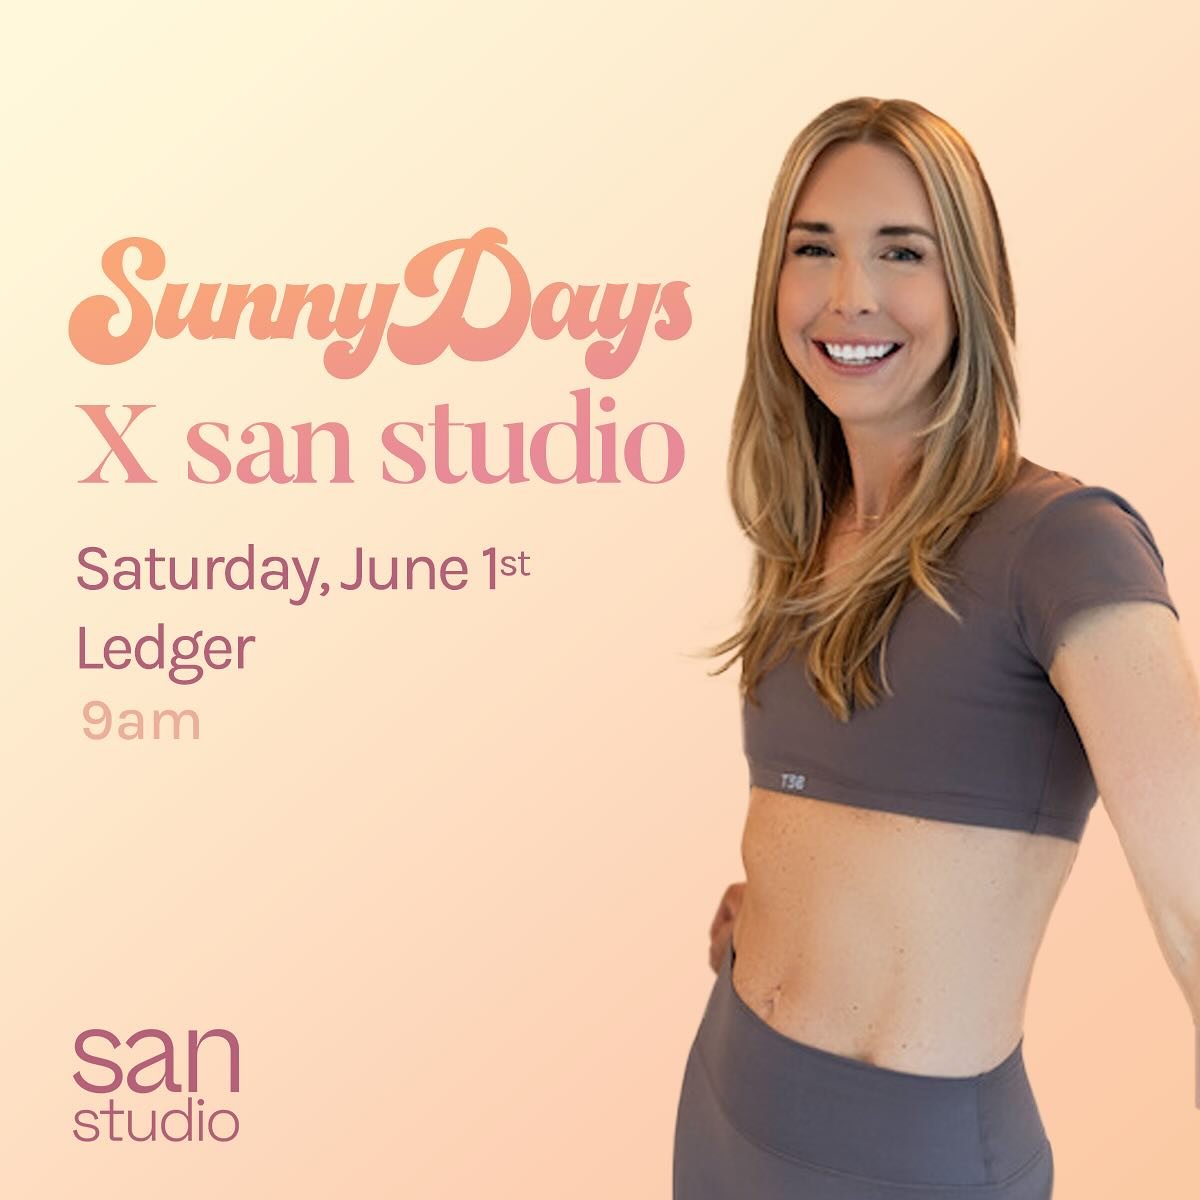 @sunnydaysbentonville is excited to announce our next event is with Bentonville&rsquo;s @s.a.n.studio ☀️

Saturday, June 1st, at 9am @ledgerbentonville 

@s.a.n.studio lead instructor @brittt_ransom will lead a 60-minute XFormer inspired pilates clas